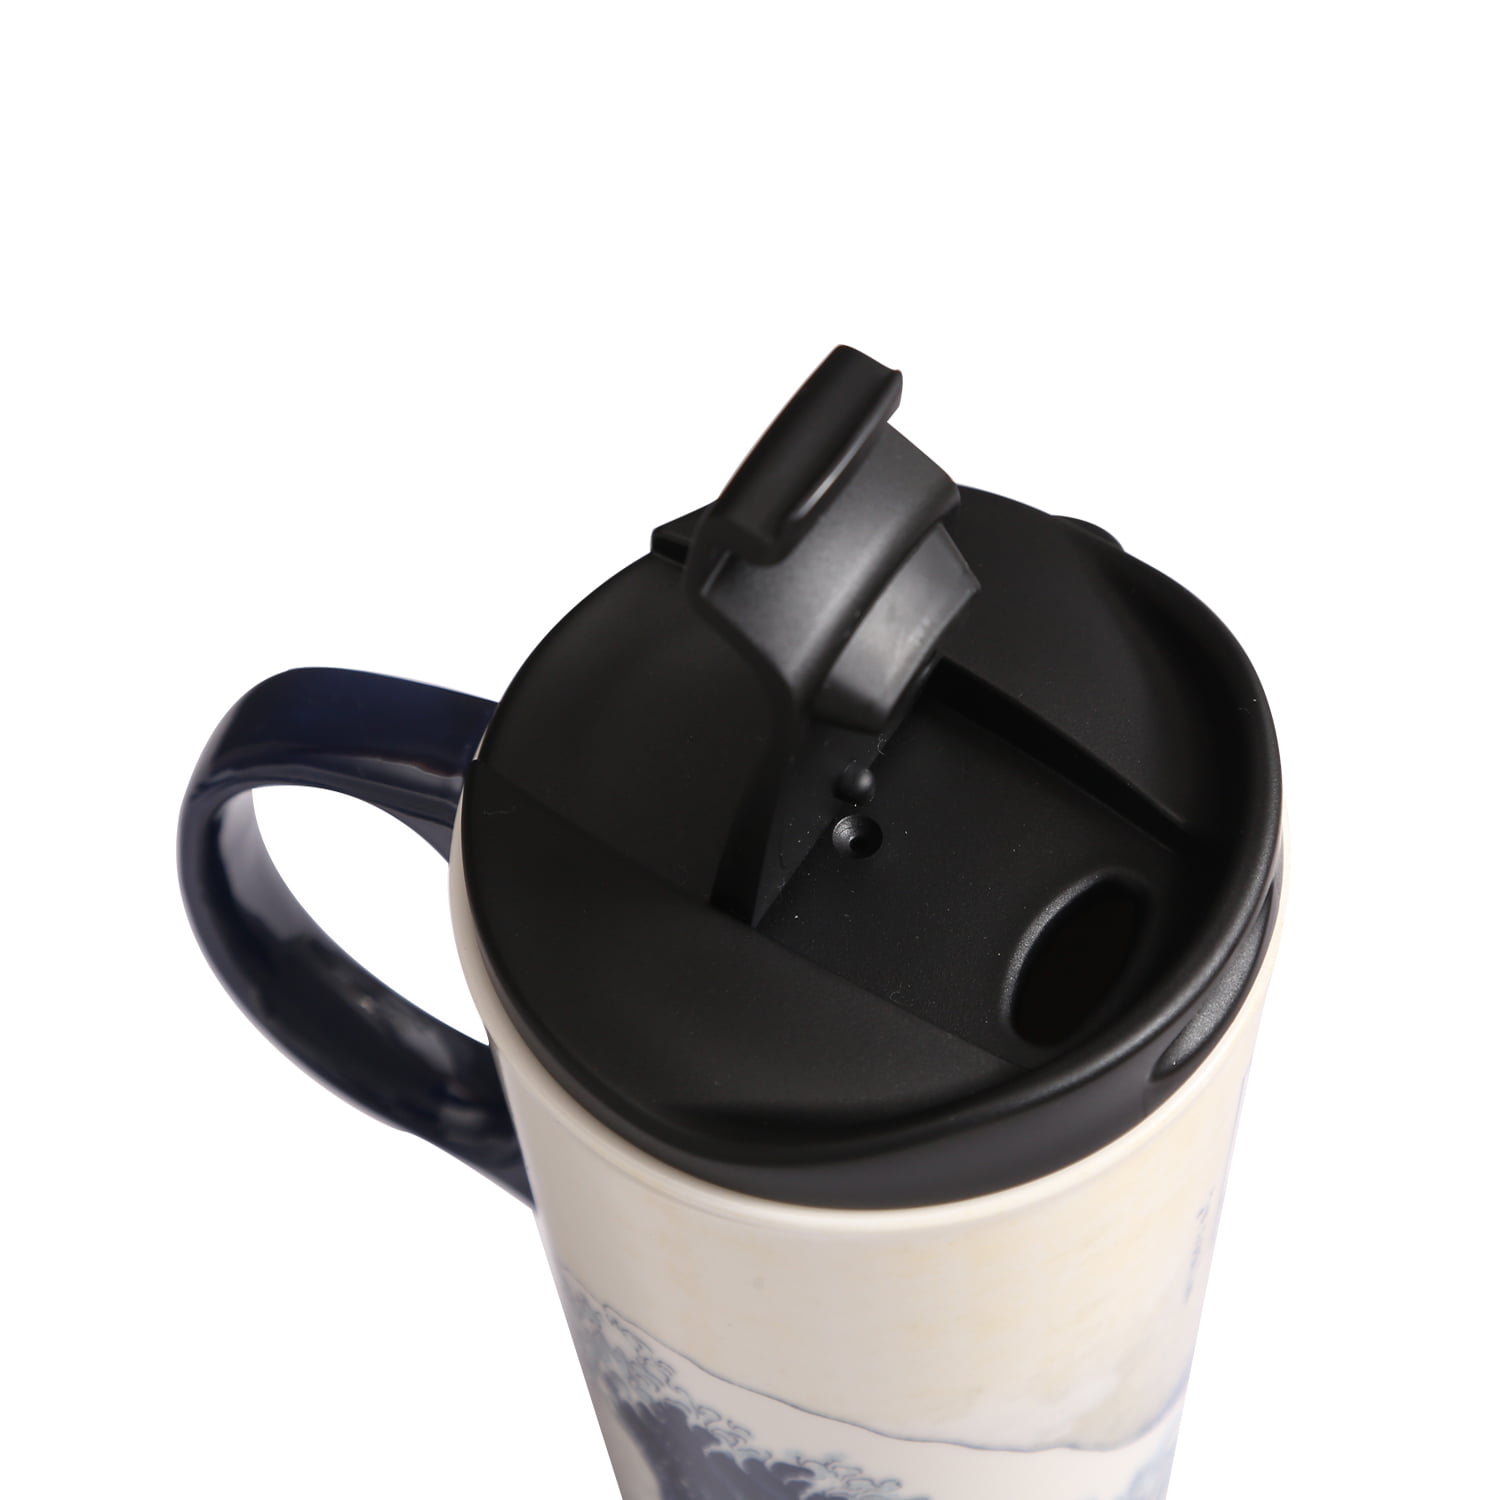  MUCR Travel Coffee Mug Spill Proof, 17oz Double Walled